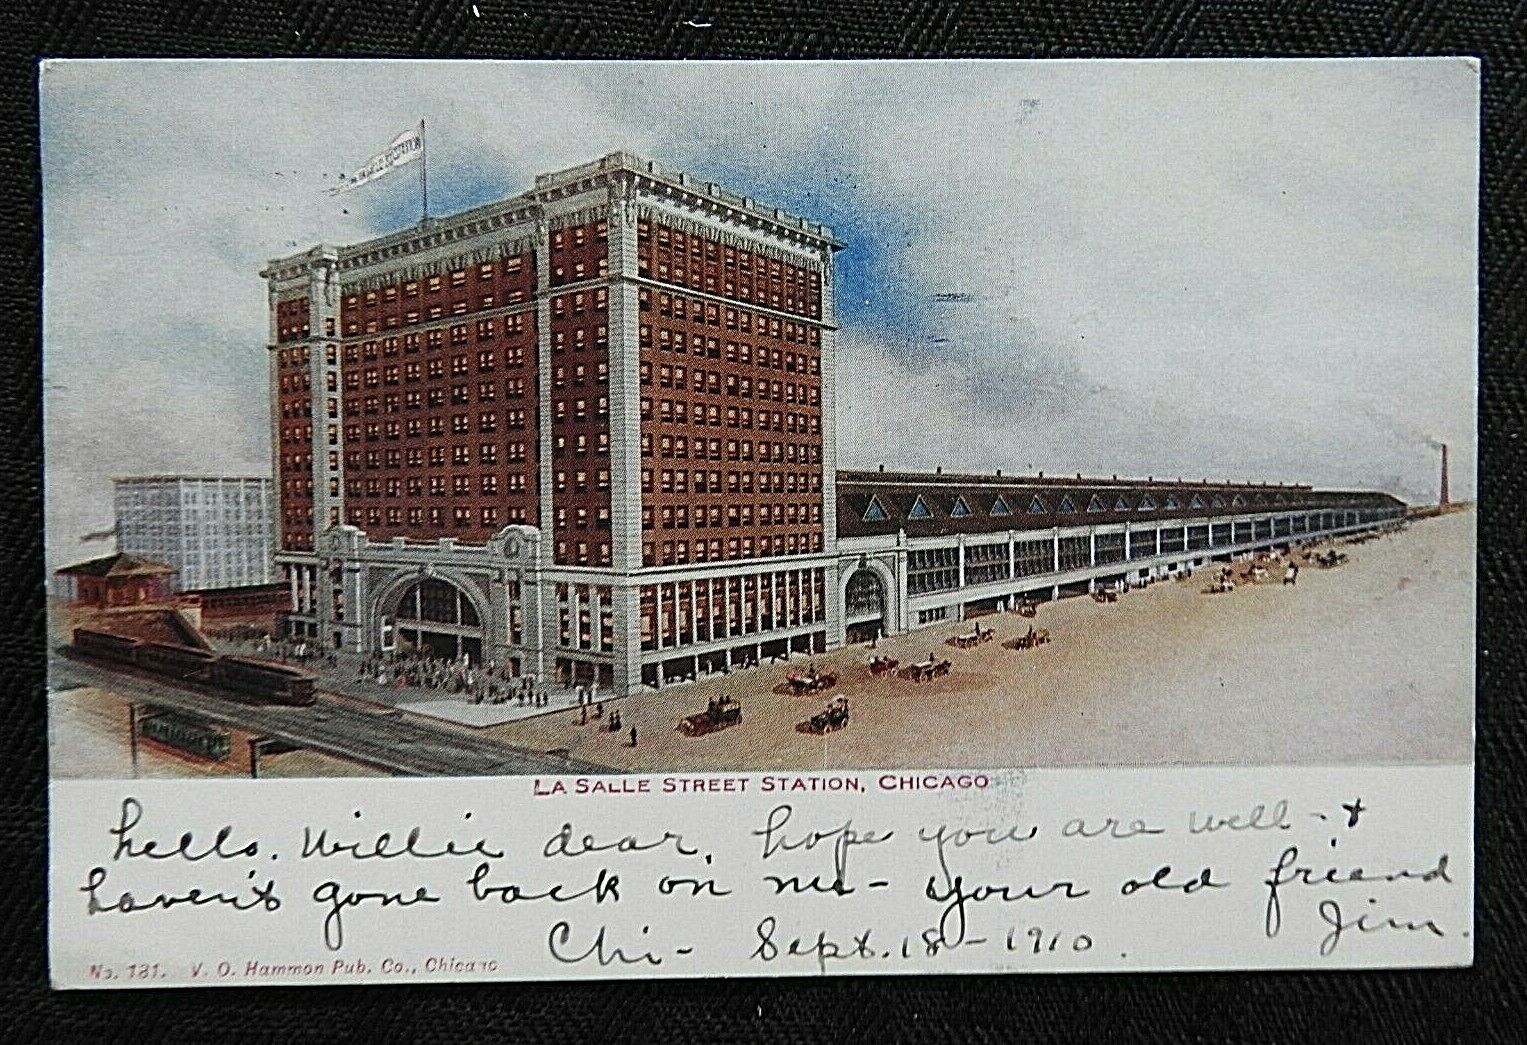 1910 LaSALLE ST TRAIN STATION NEW YORK CENTRAL NICKEL PLATE CHICAGO IL POSTCARD